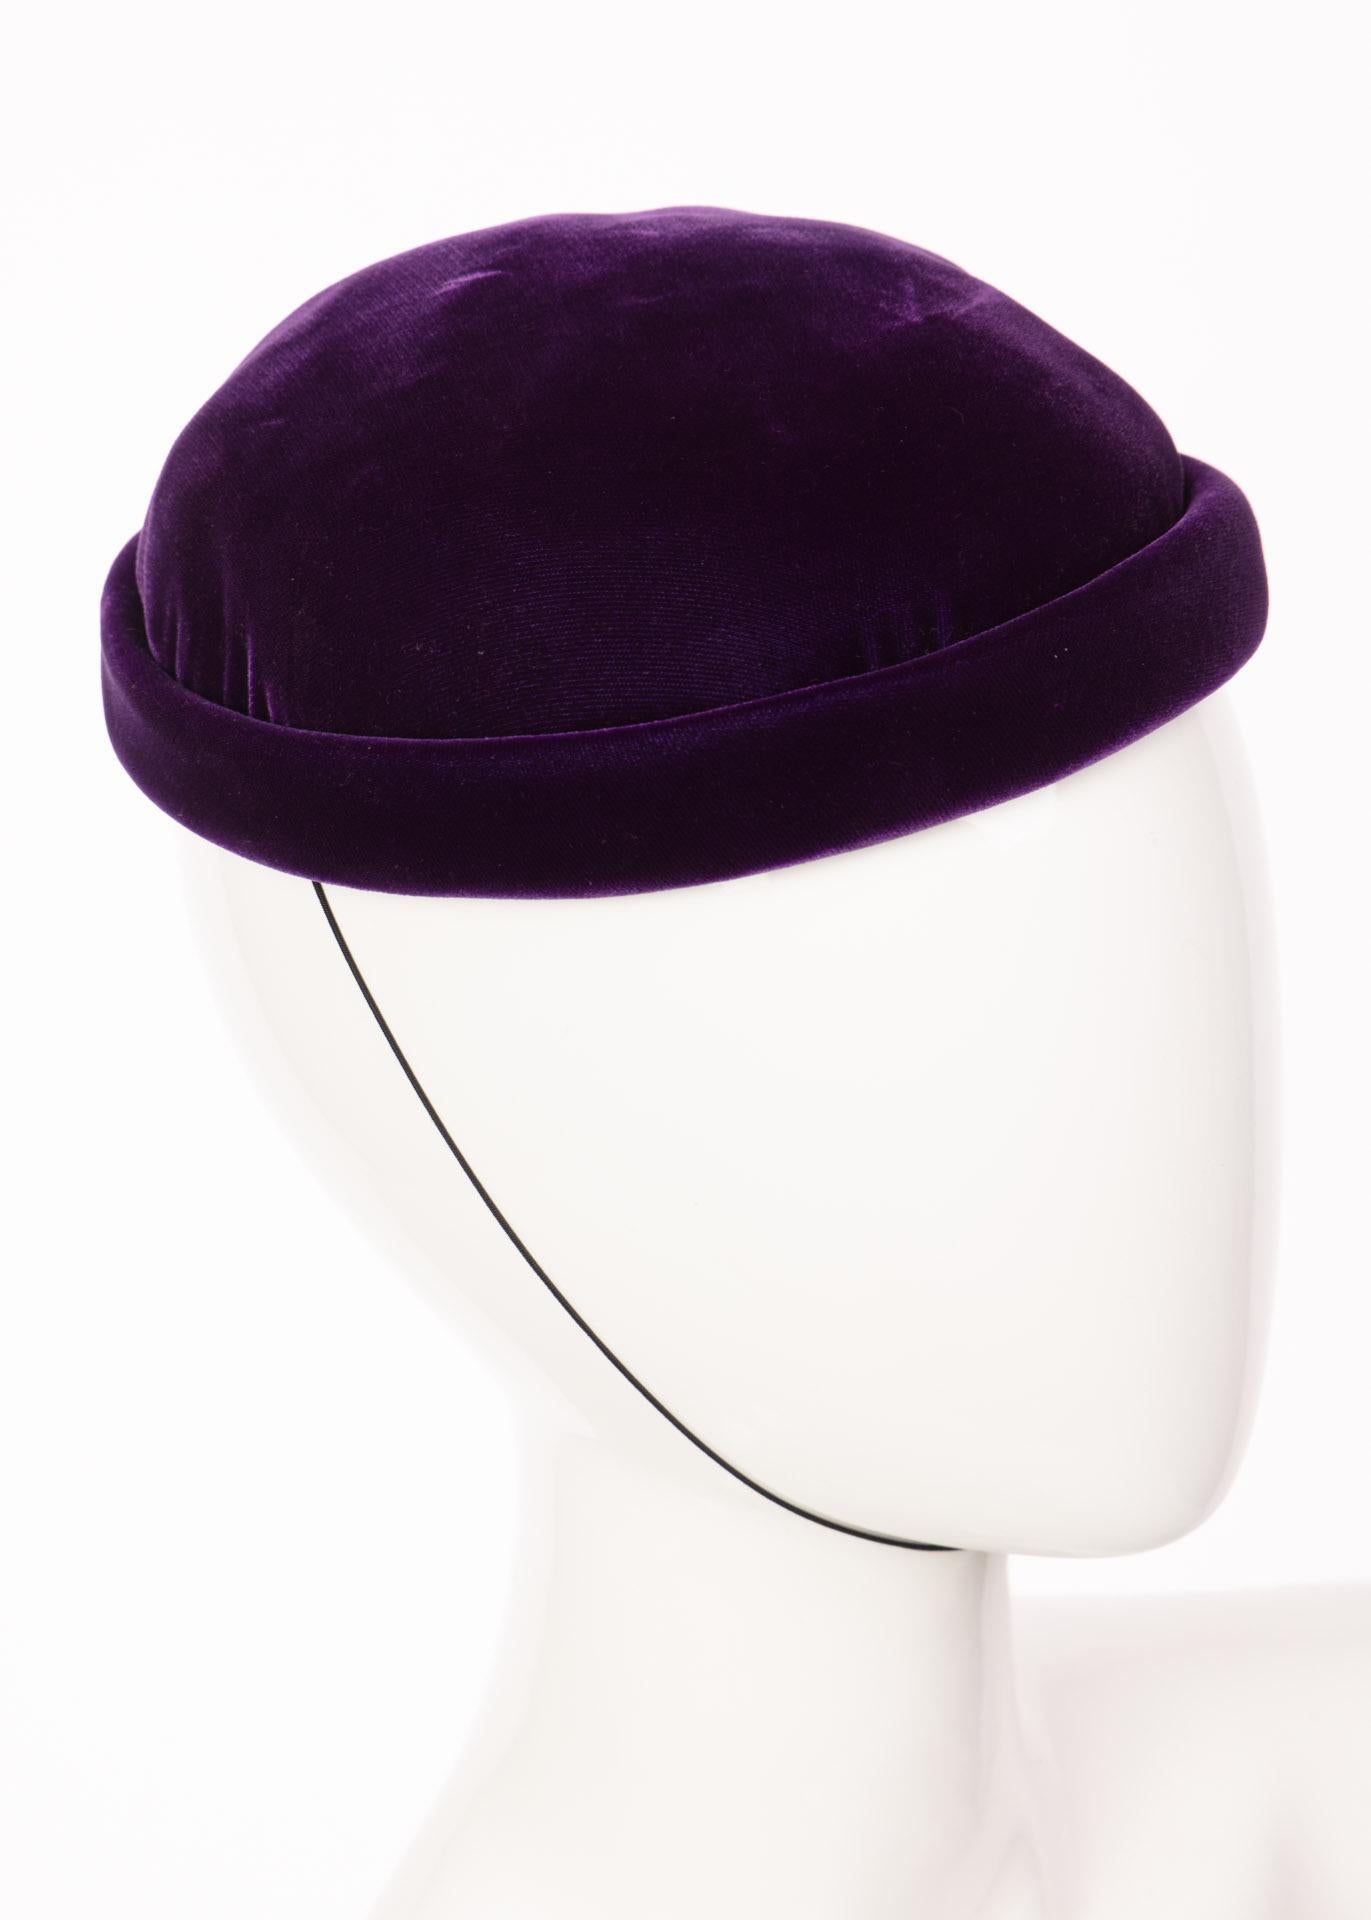 Vintage Givenchy Boutique Purple Silk Velvet hat.
The hat is structured with a rolled brim and an elastic chin strap. 
Fully lined and fitted with a grosgrain ribbon sweatband.
Excellent condition. 

Size estimate: One size fits most
Circumference: